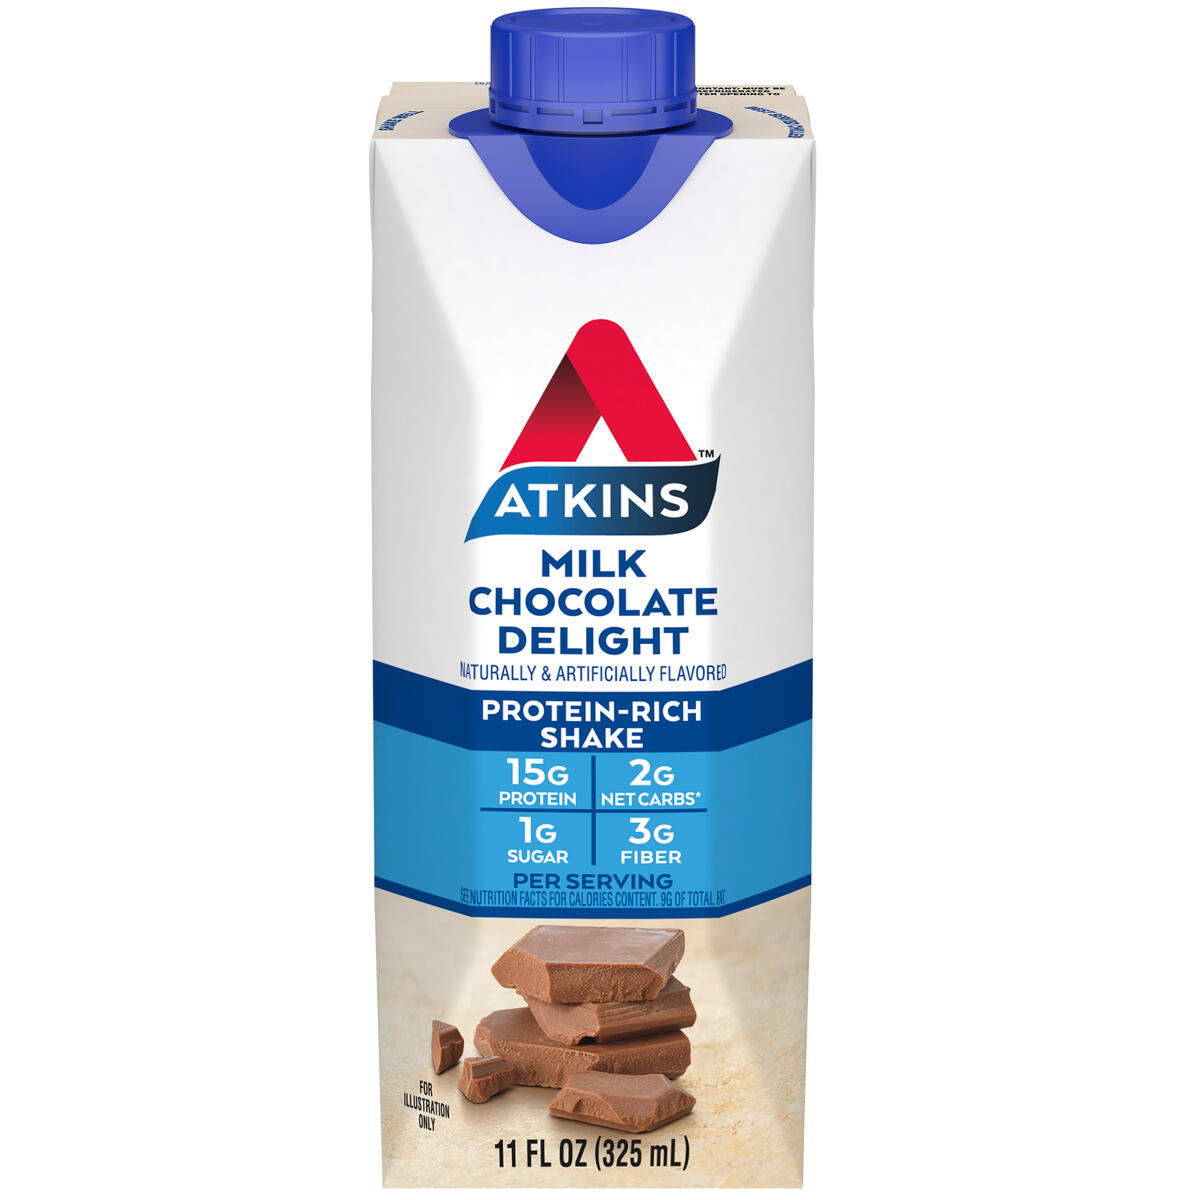 Atkins Milk Chocolate Delight Protein Shake, High Protein, Low Carb, Low Sugar, Keto Friendly, Gluten Free, 12 Ct - image 3 of 8